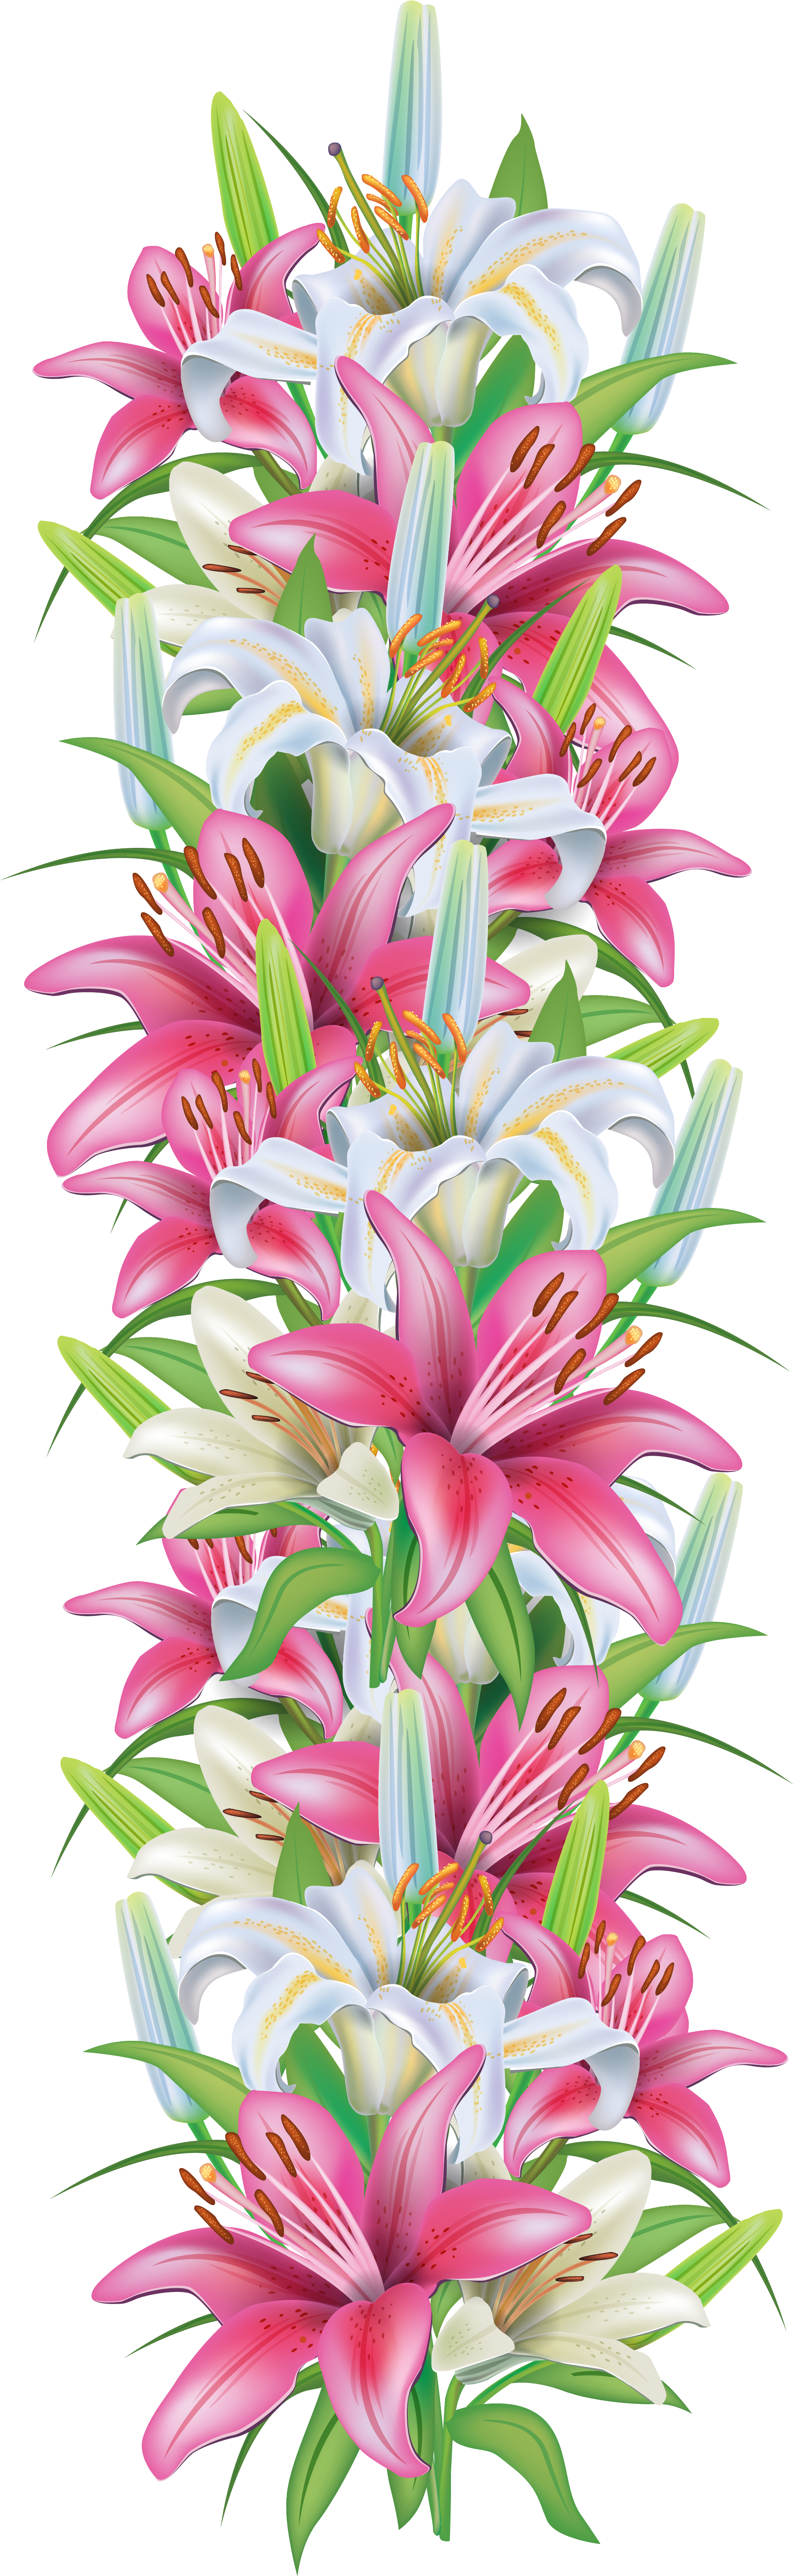 Pink And White Lilies Decoration Border Png Clipart